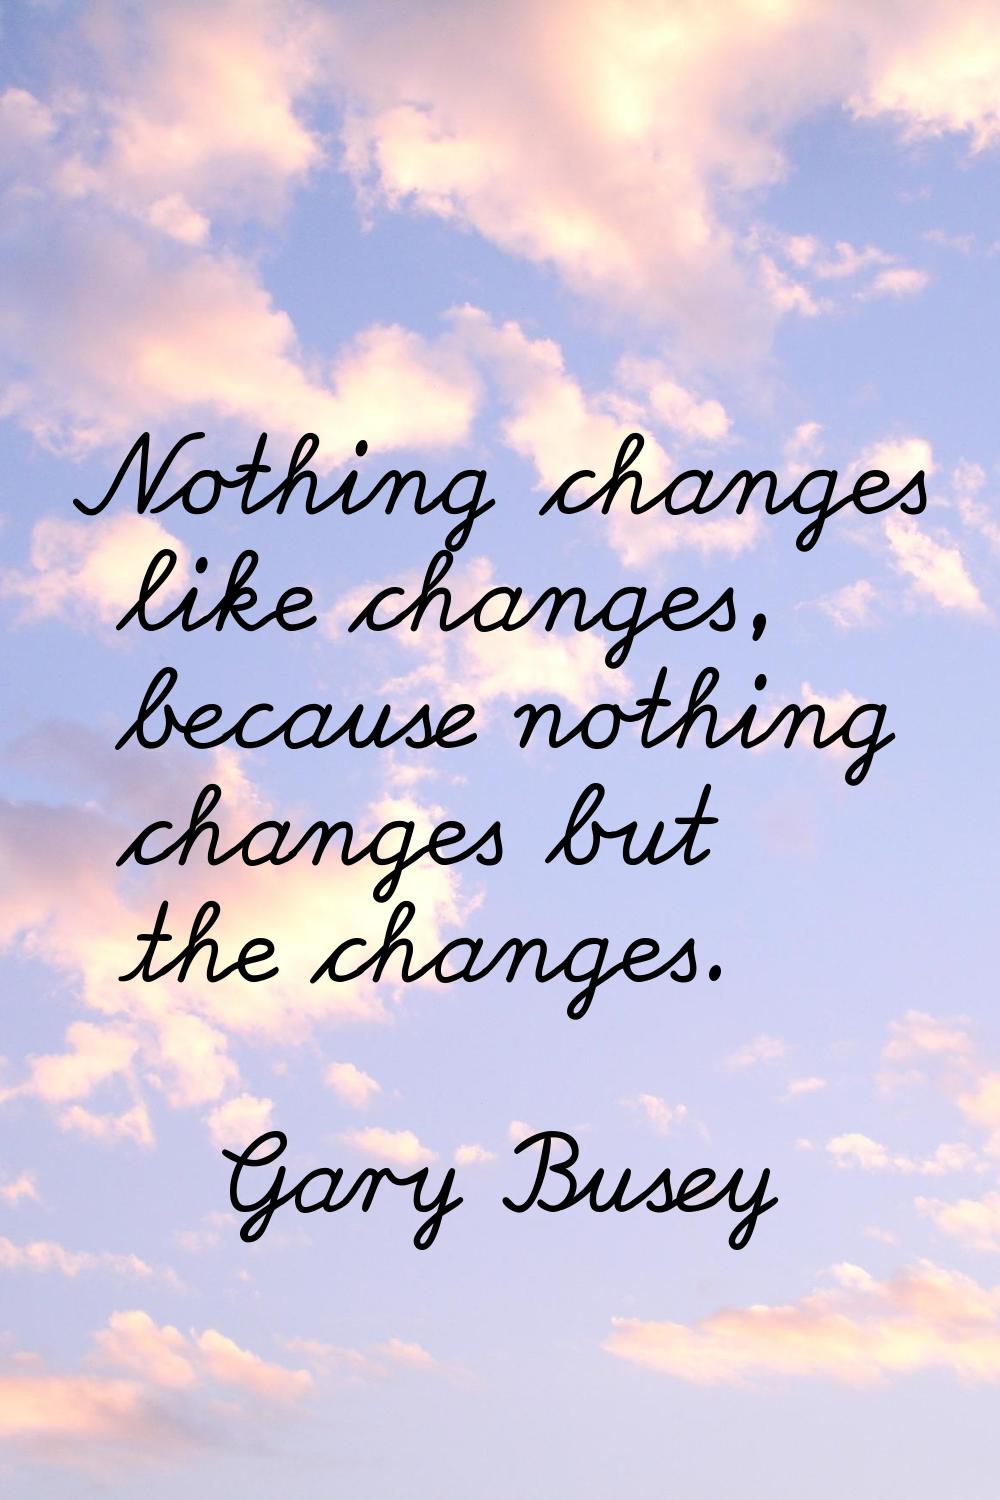 Nothing changes like changes, because nothing changes but the changes.